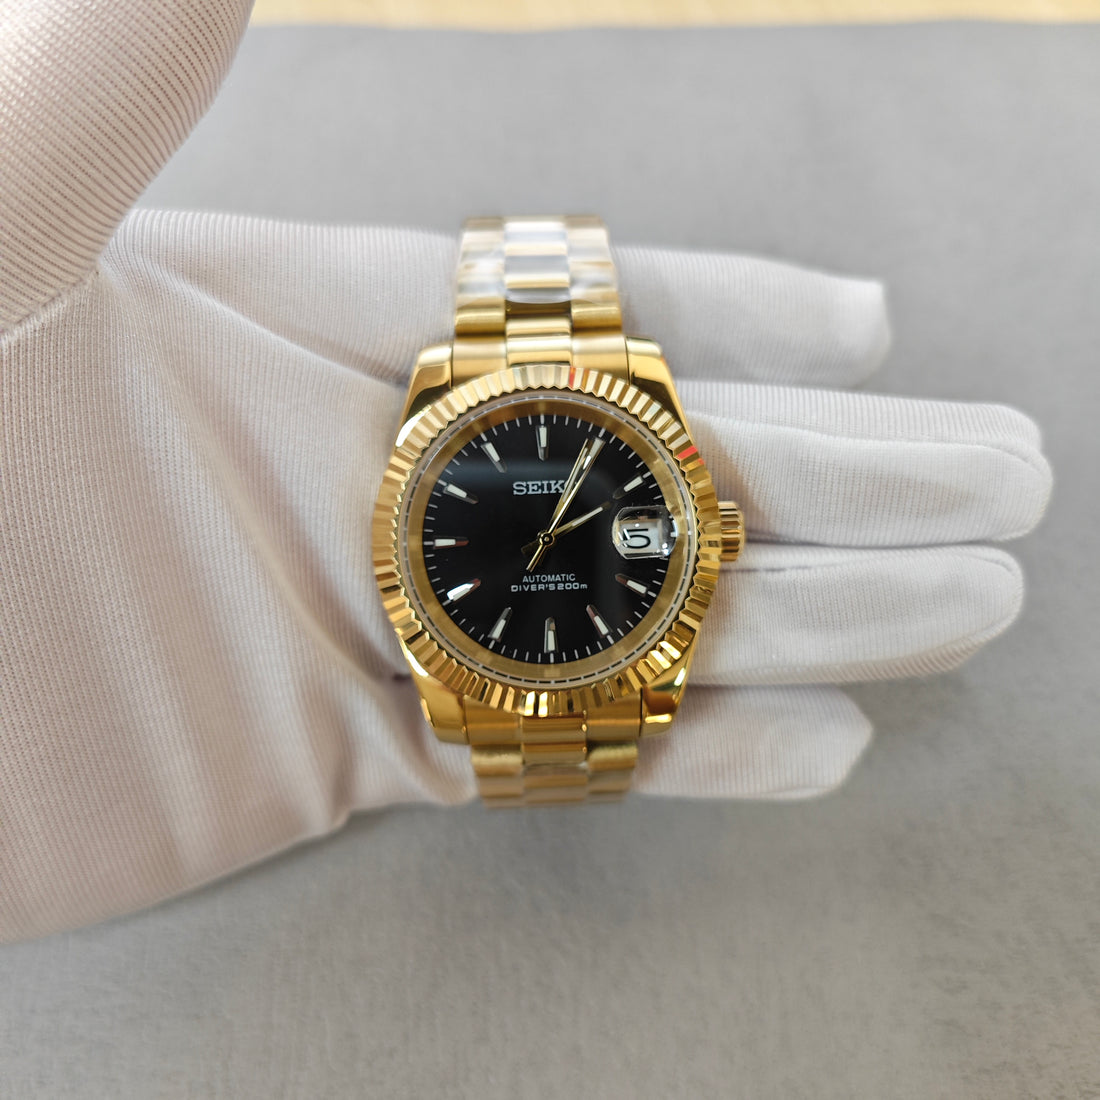 Black Dial Date Just - Fluted Bezel- Gold Tone Case - Presidential Bracelet - NH35 Automatic Movement